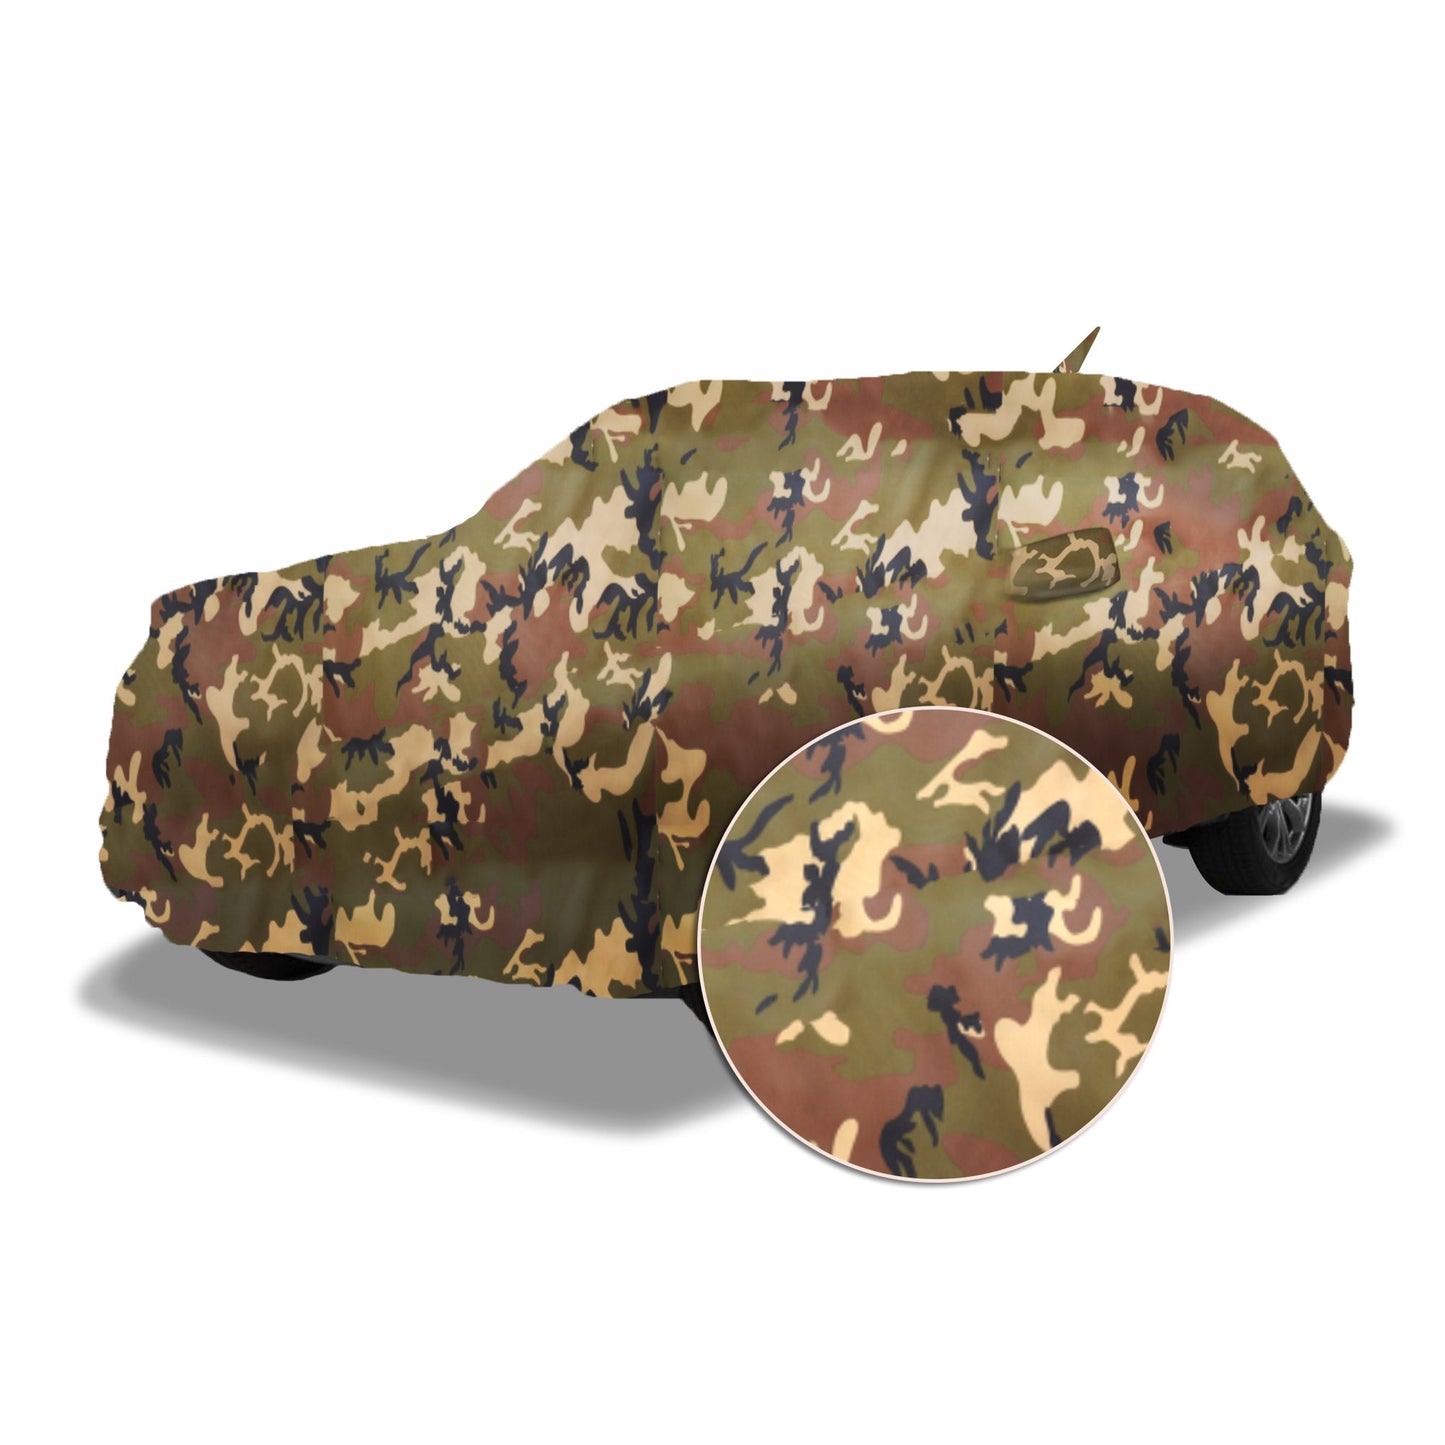 Ascot Volkswagen The T-Roc Car Body Cover Extra Strong & Dust Proof Jungle Military Car Cover with UV Proof & Water-Resistant Coating